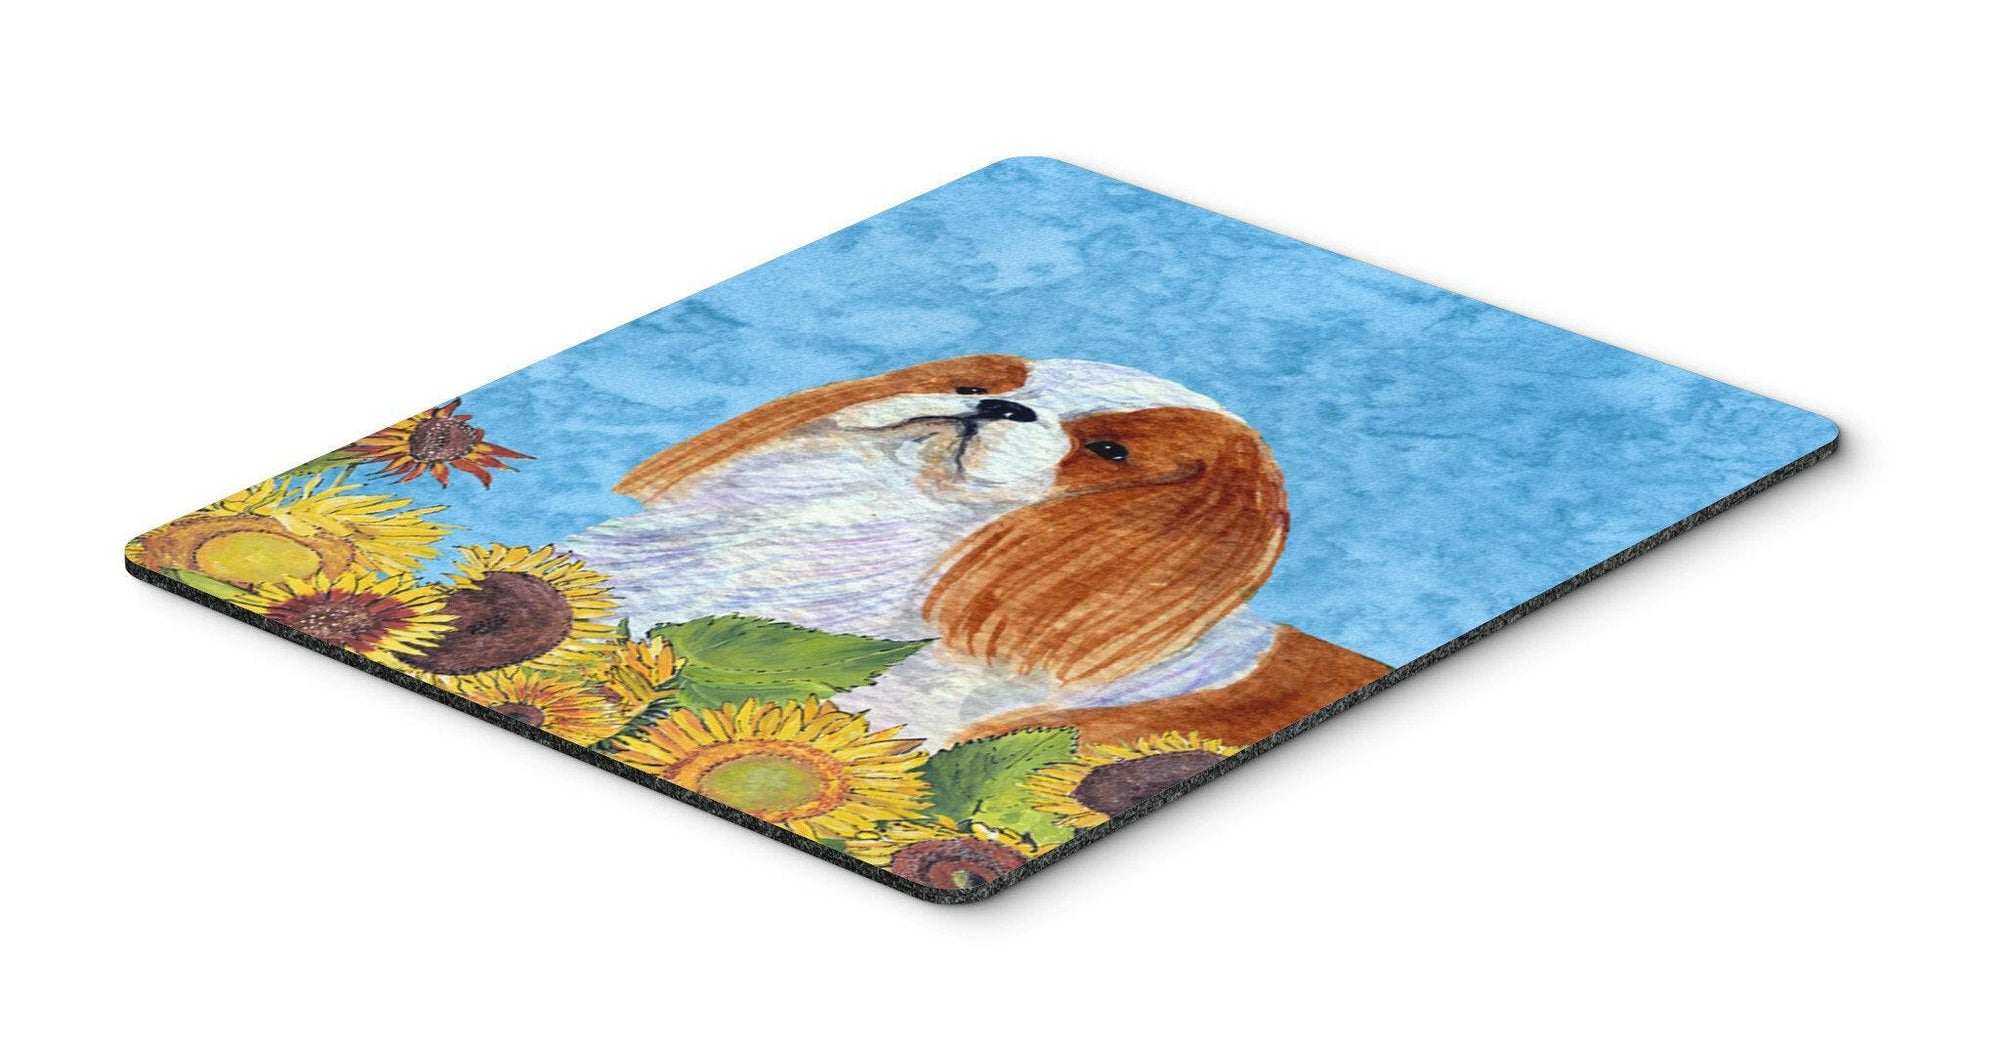 English Toy Spaniel Mouse Pad, Hot Pad or Trivet by Caroline's Treasures